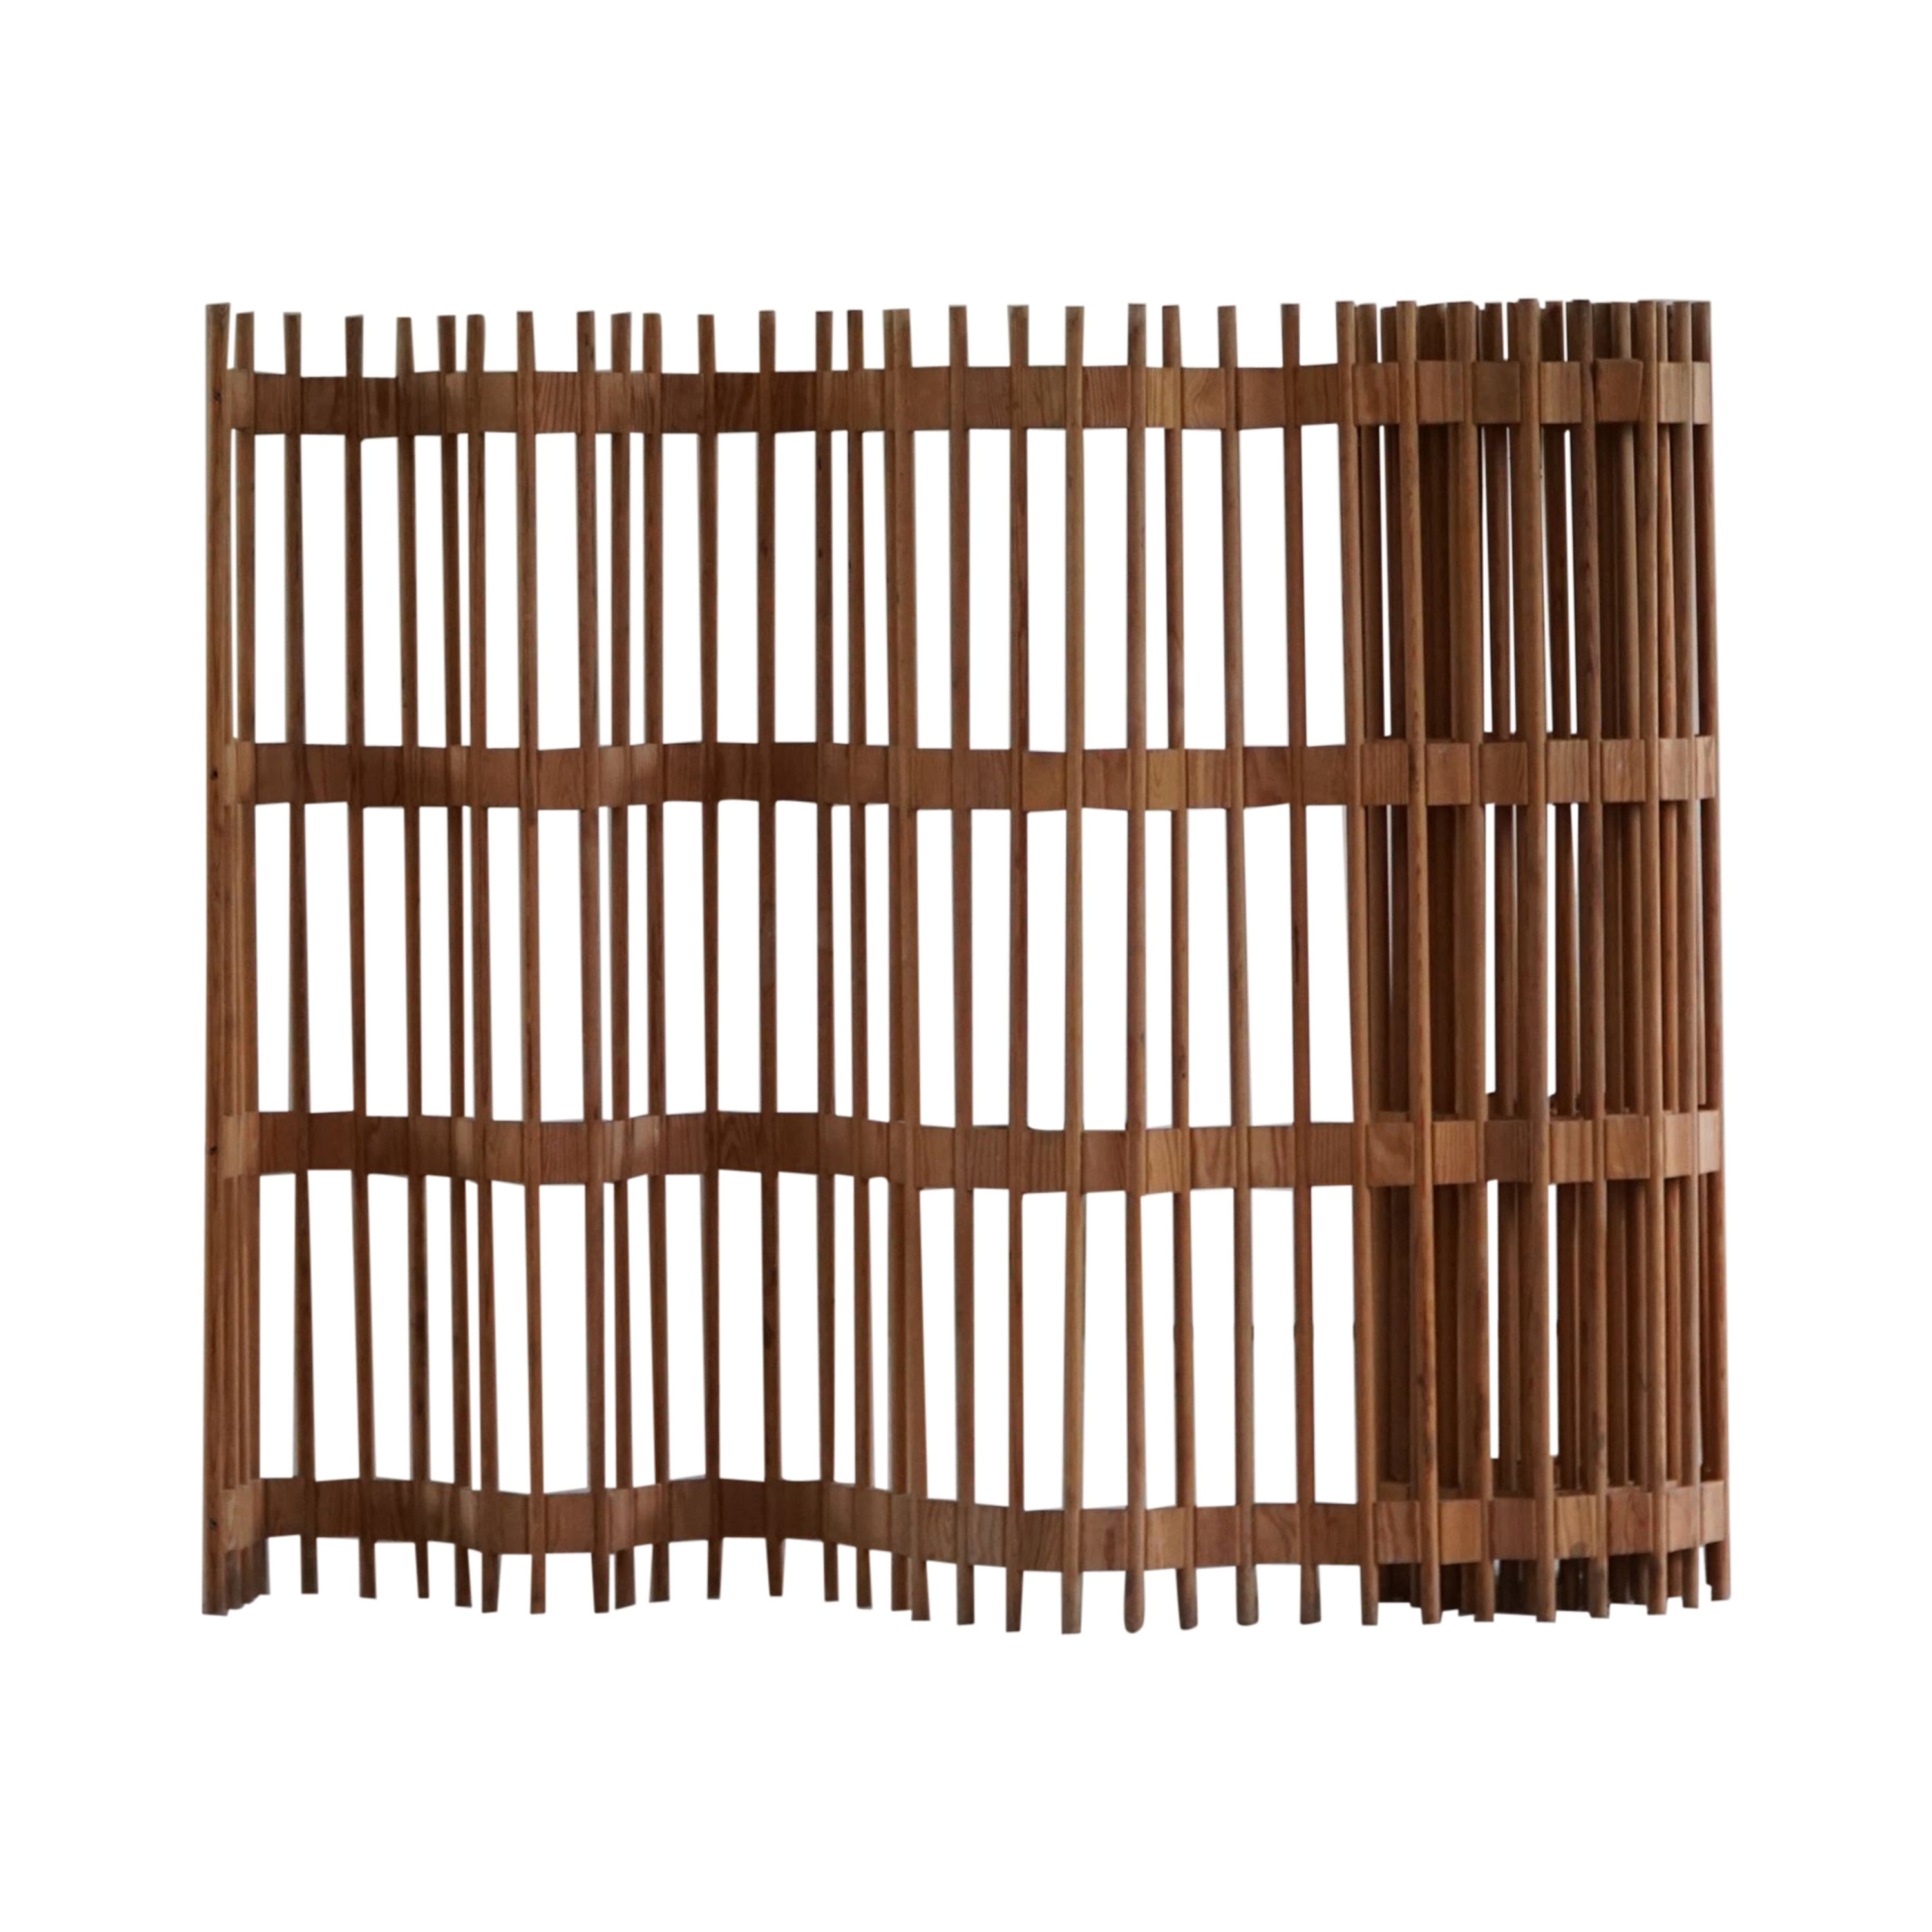 Danish Modern Sculptural Folding Screen / Room Divider in Pine, Made in 1960s For Sale